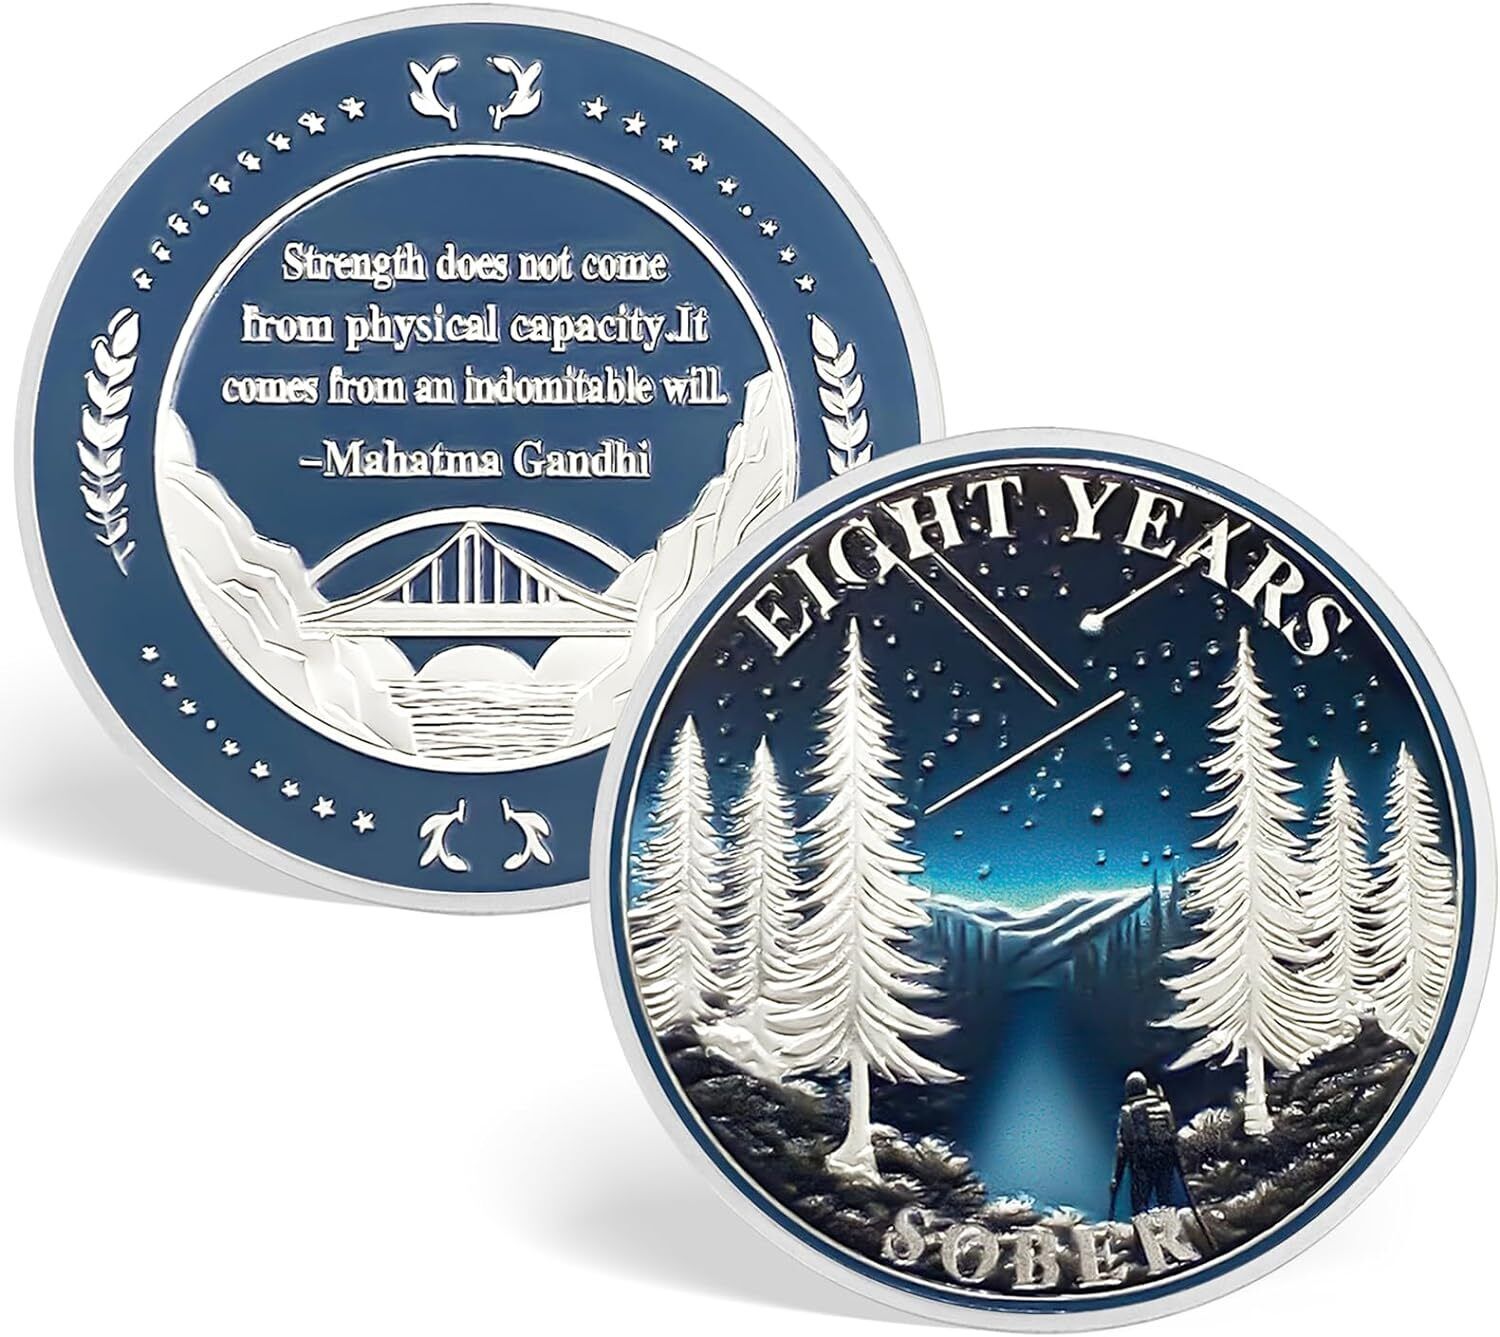 8 Year Sobriety Coin One Year Sobriety Chip AA Medallions Gifts for Women Men